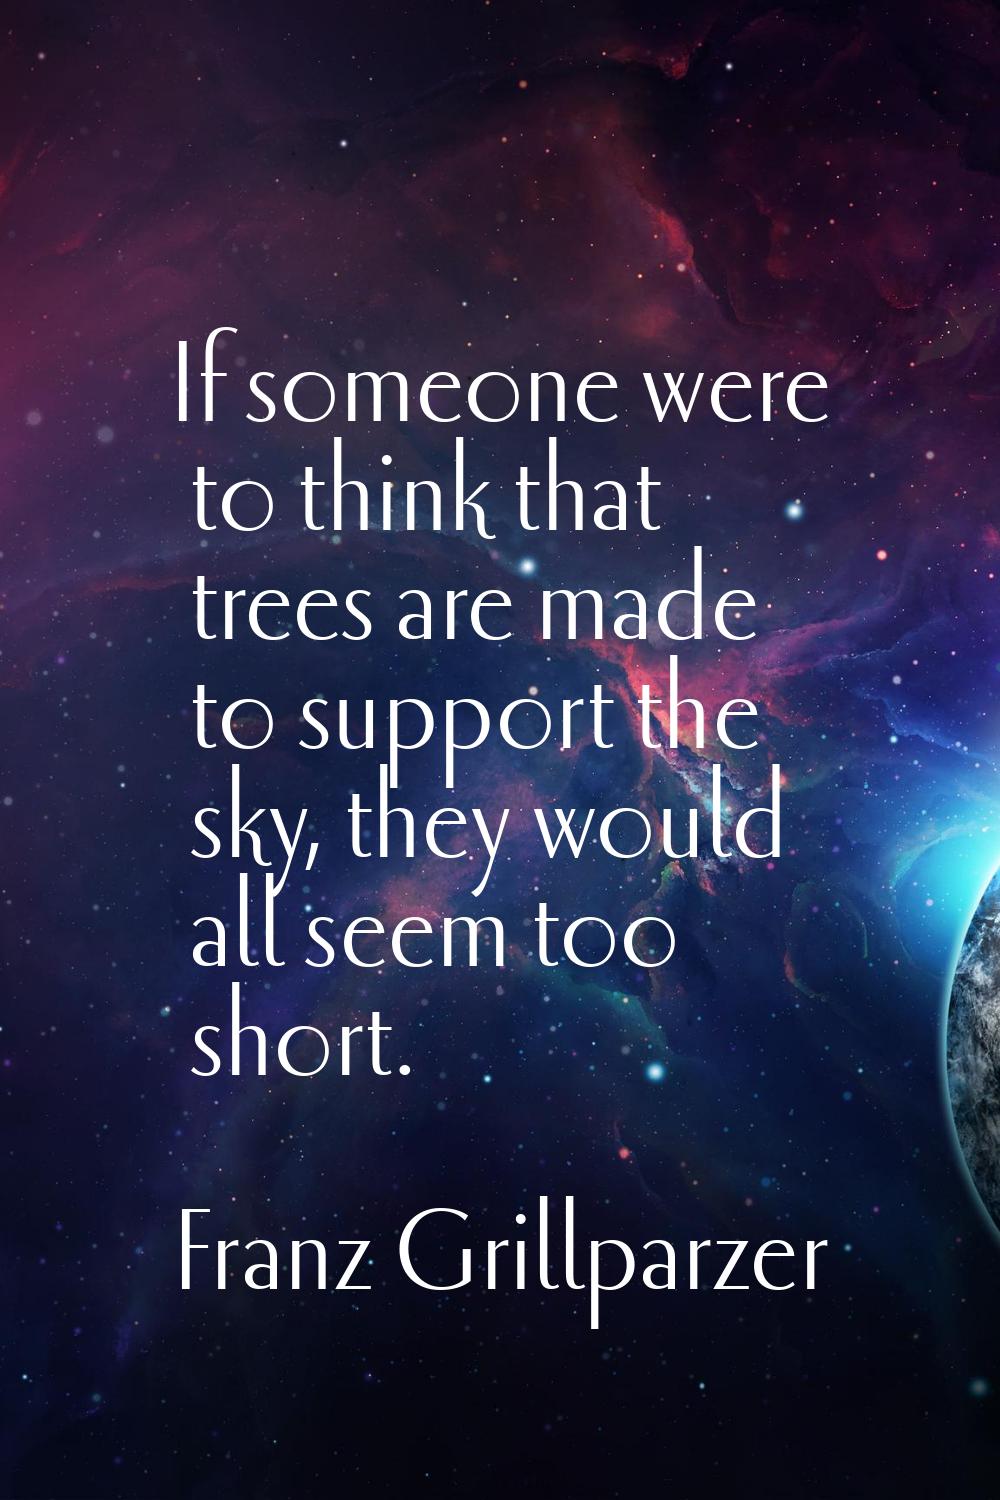 If someone were to think that trees are made to support the sky, they would all seem too short.